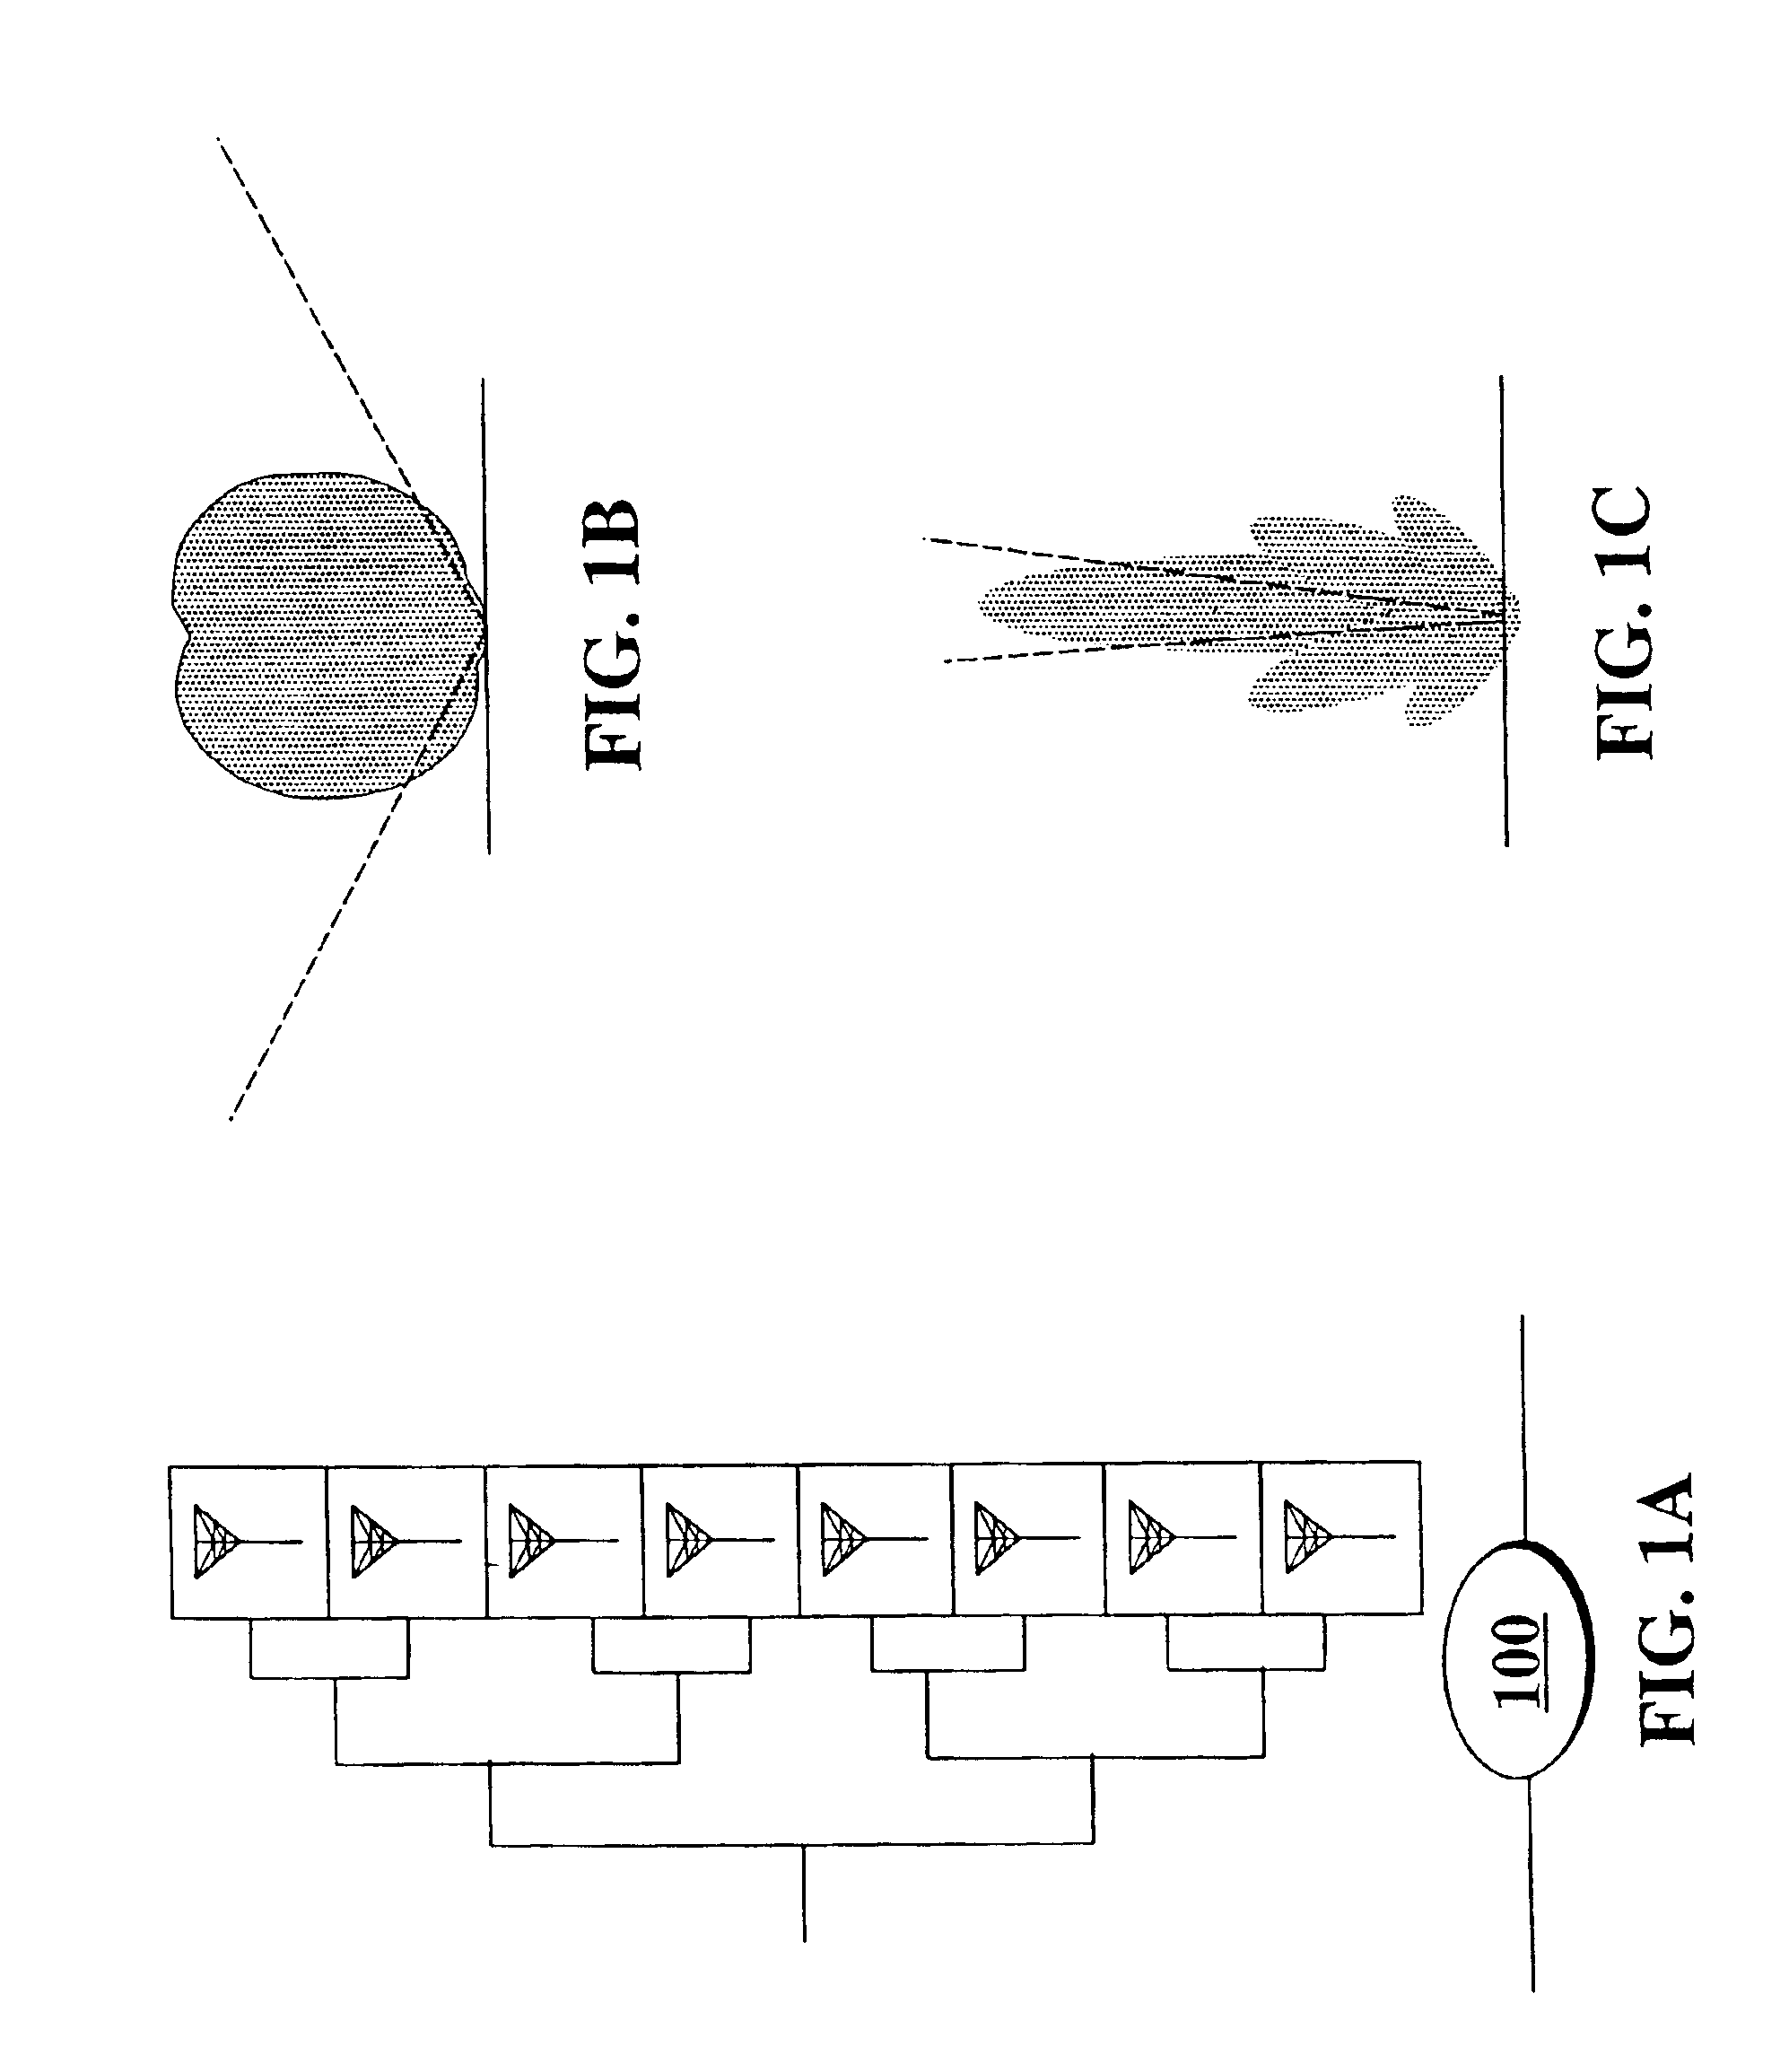 Active antenna array configuration and control for cellular communication systems